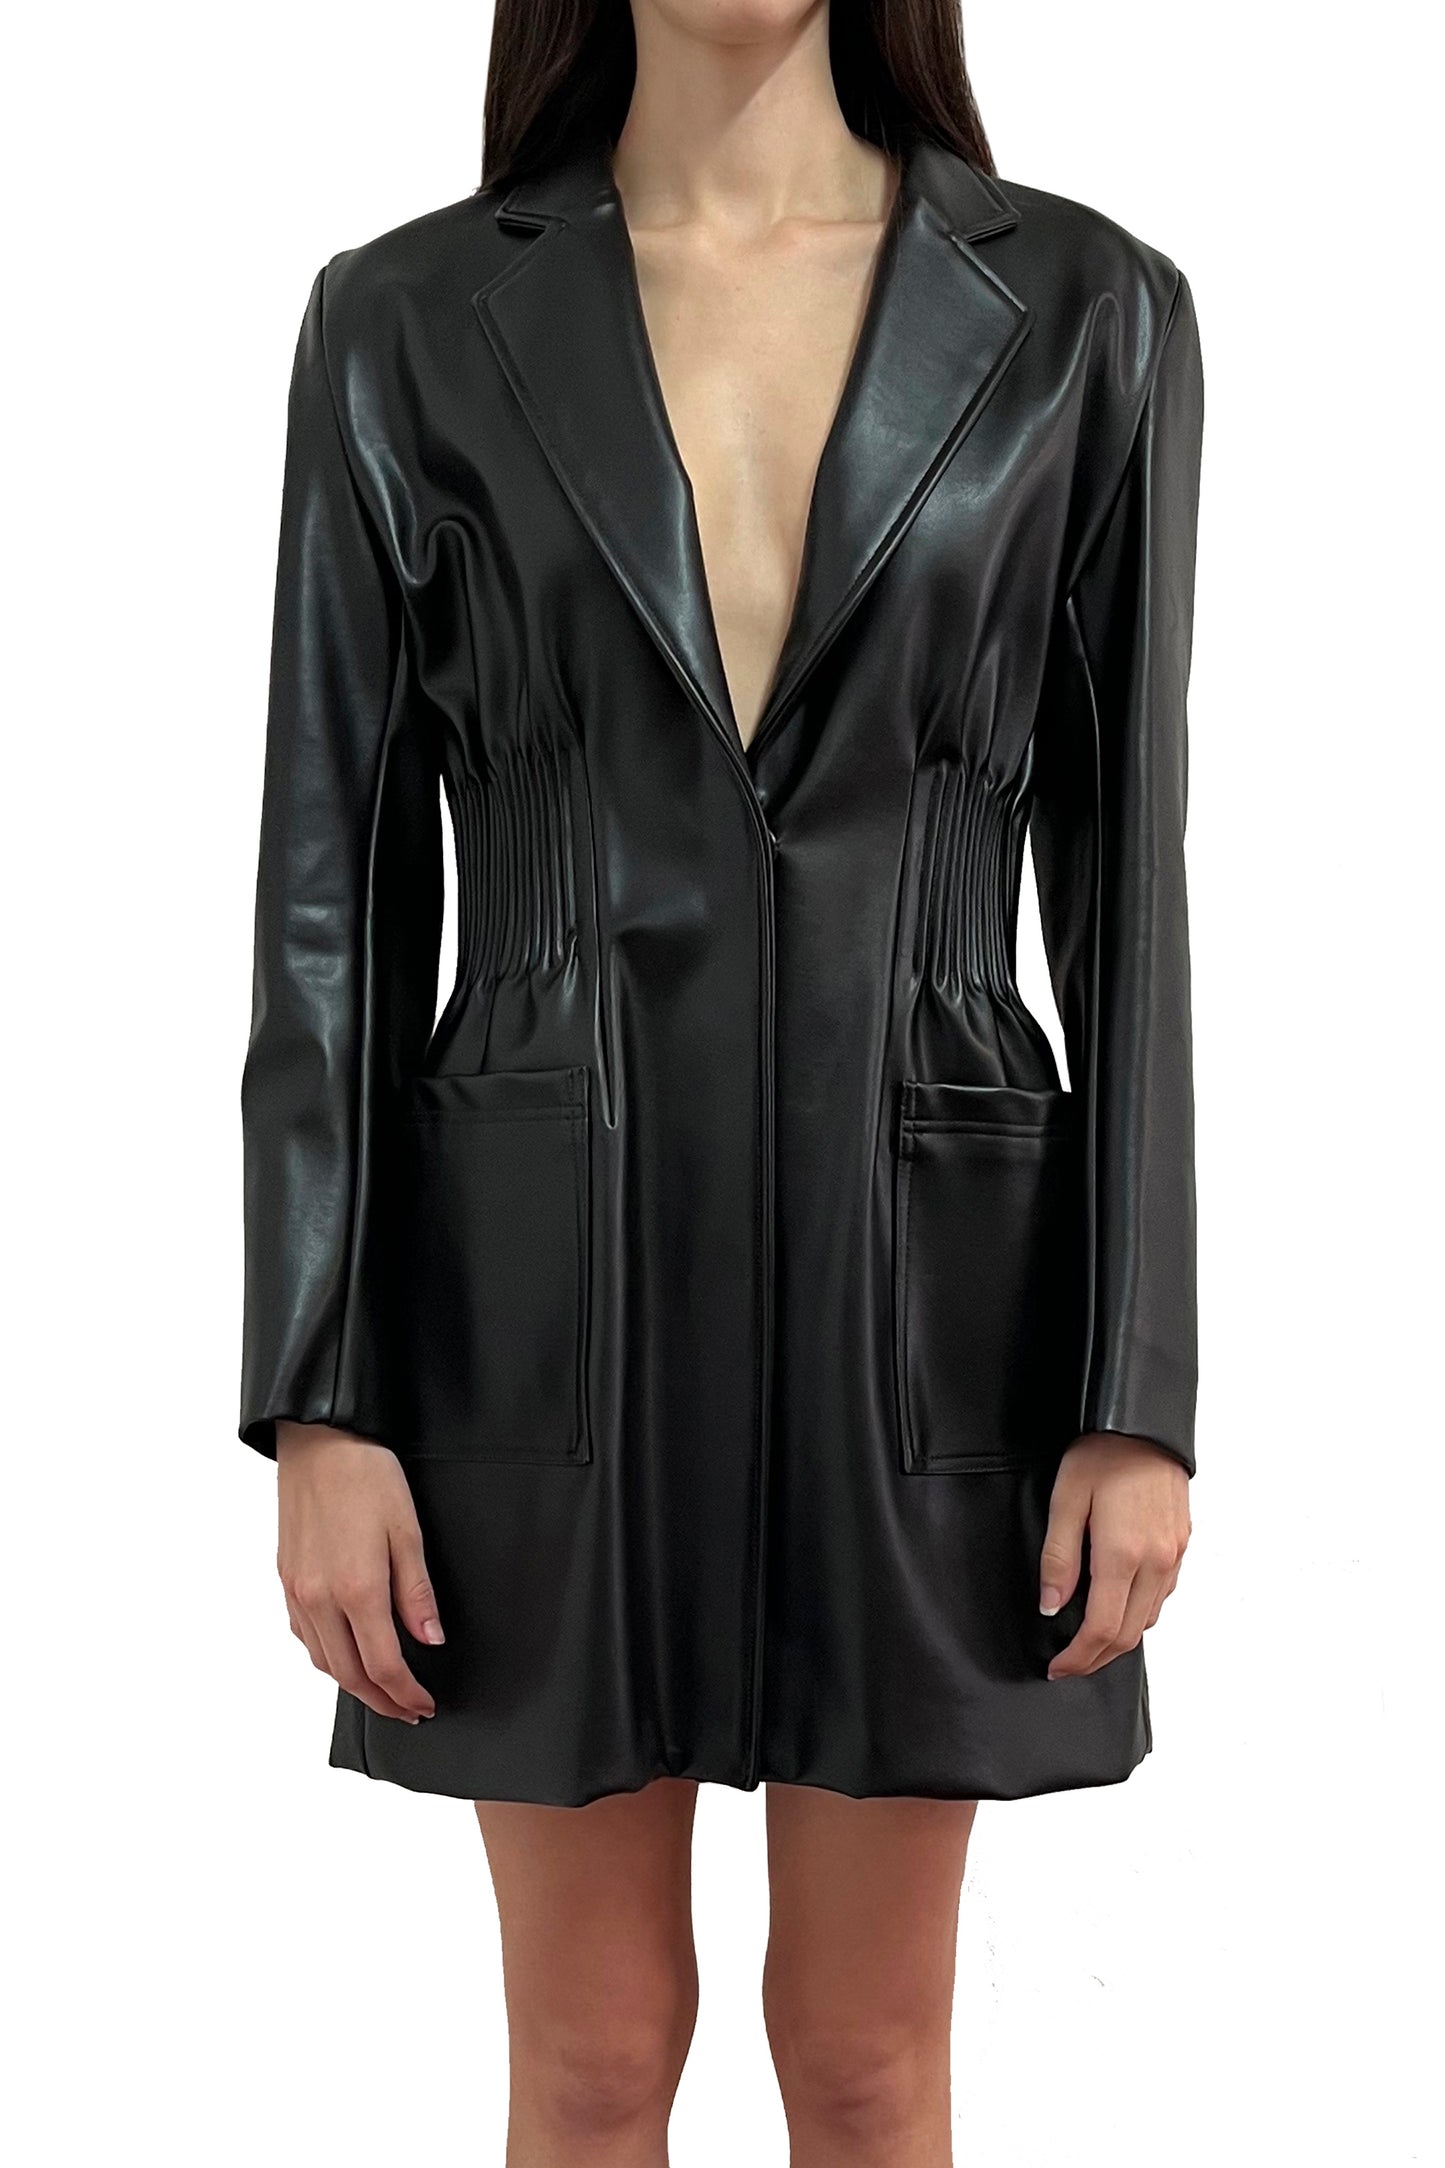 Cactus leather Back-open with elastic waist detail jacket Dress